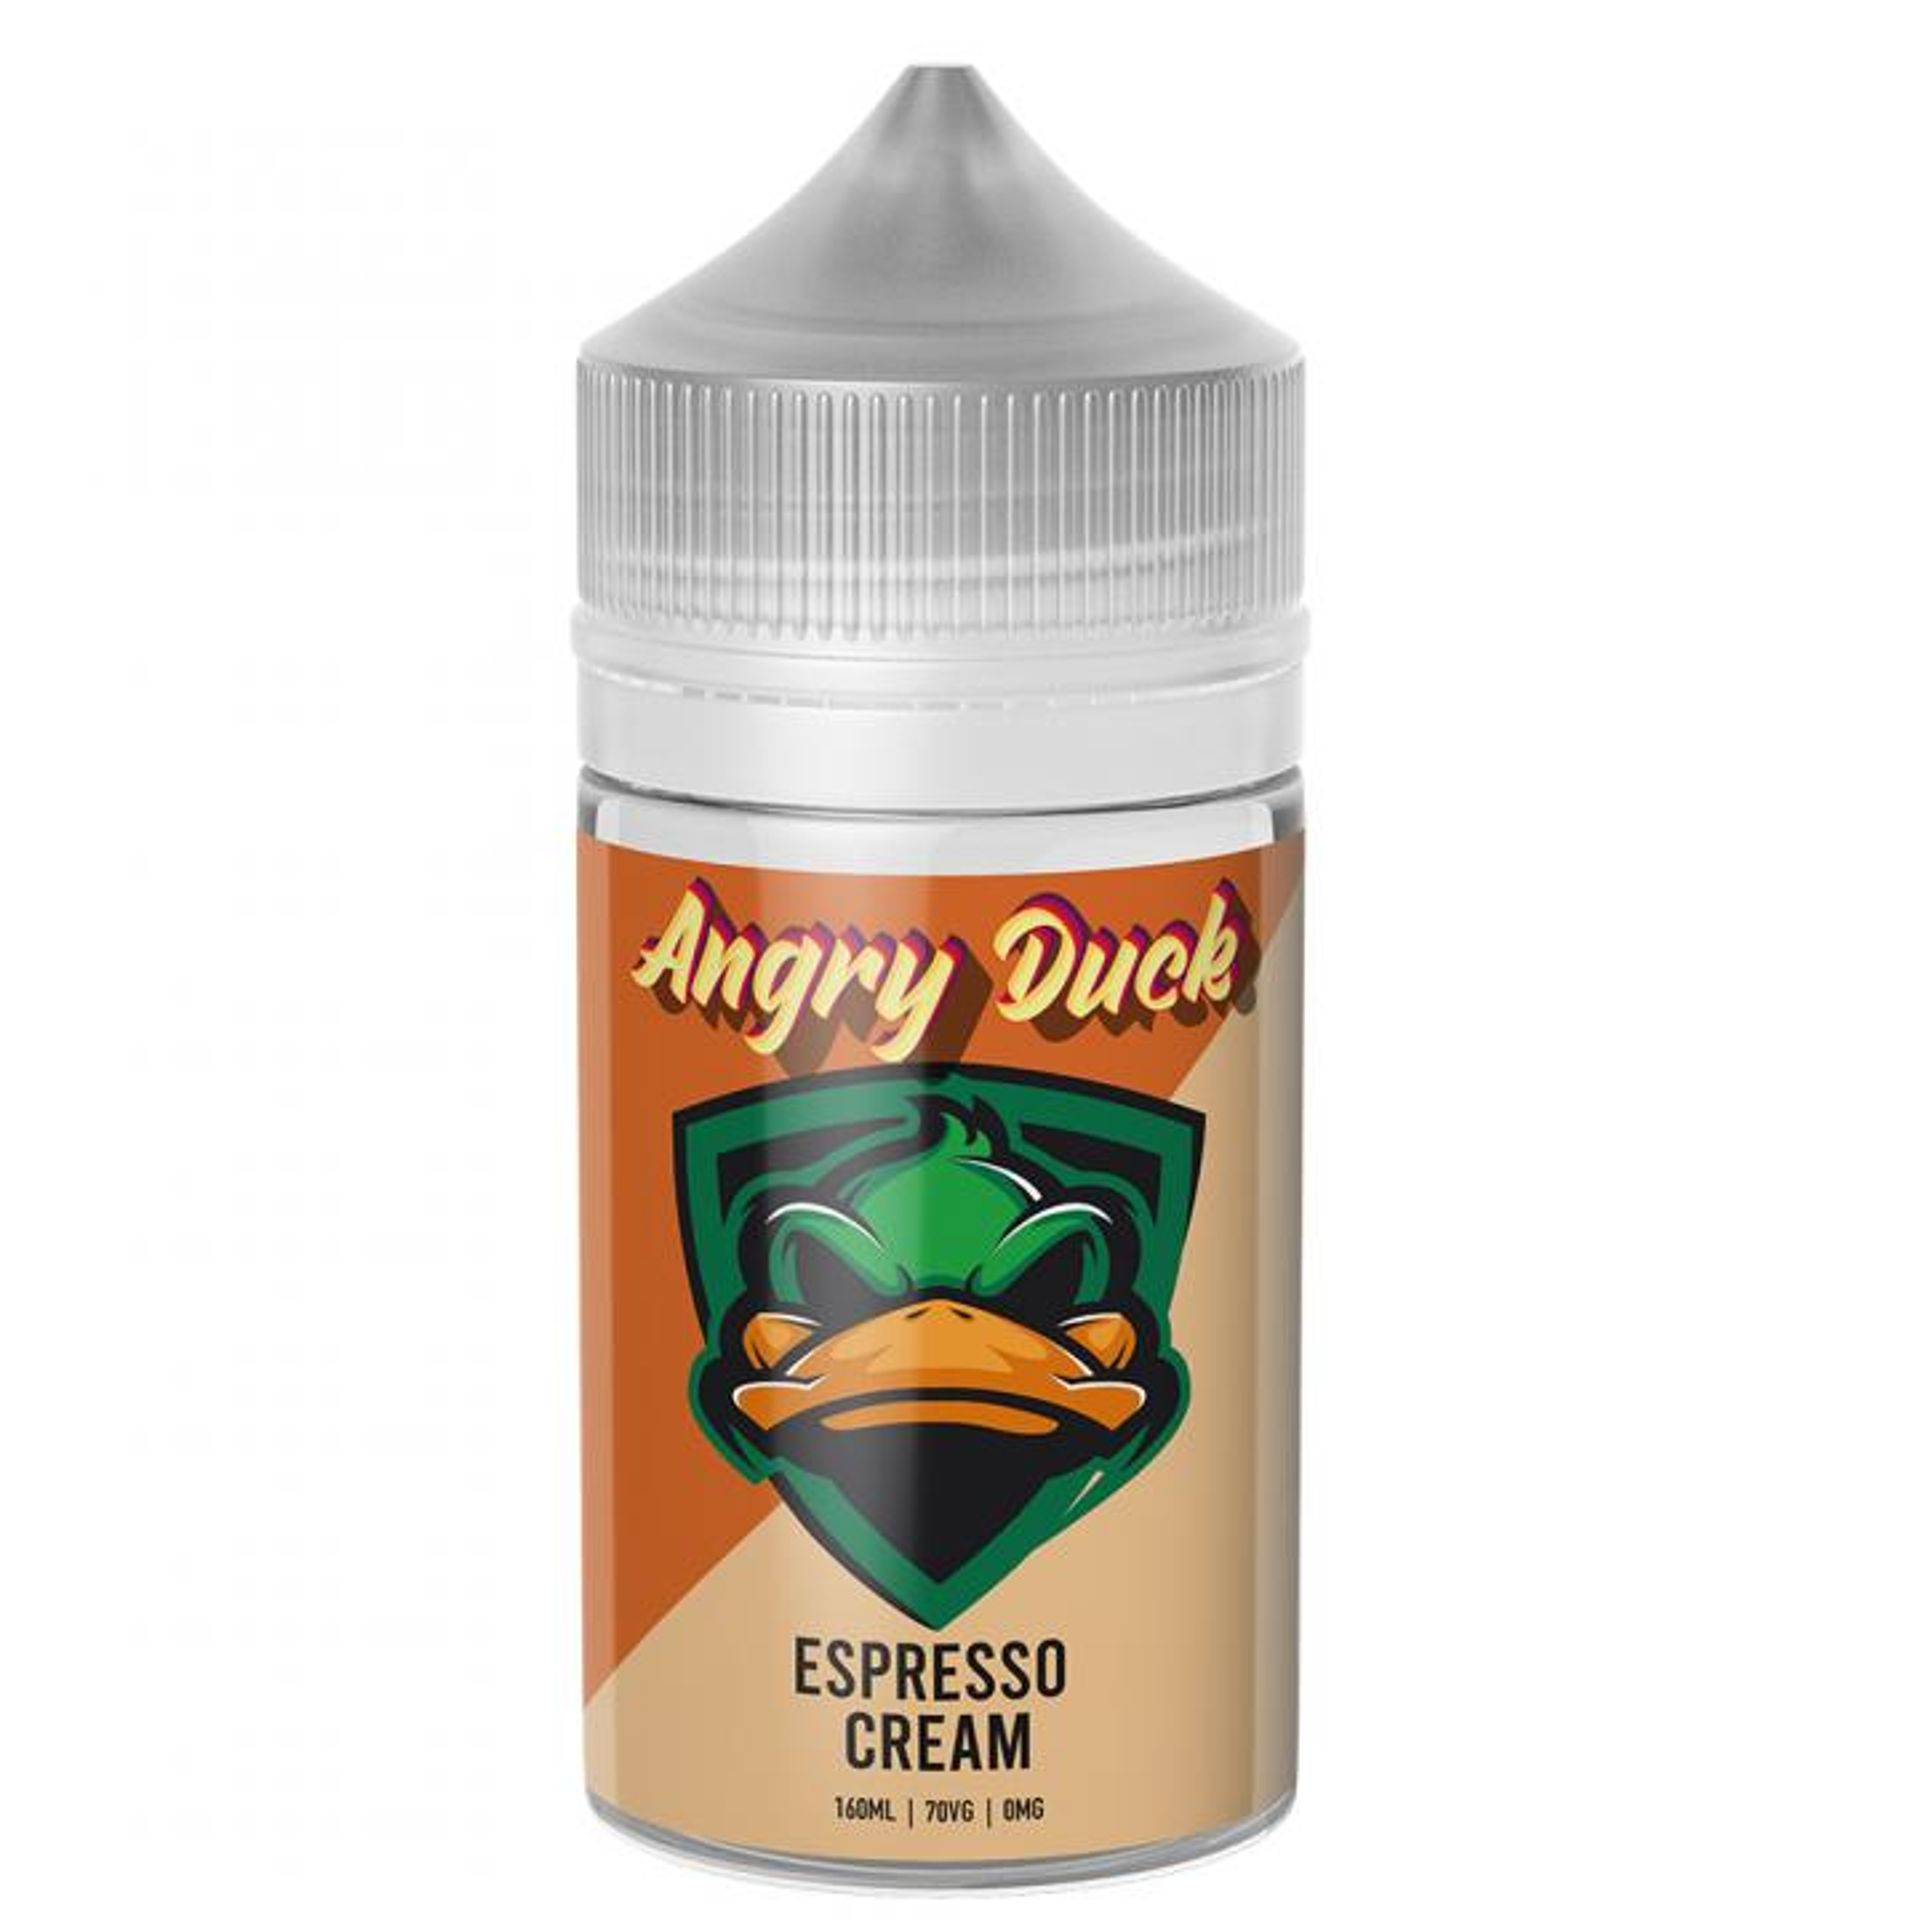 Image of Espresso Cream by Angry Duck